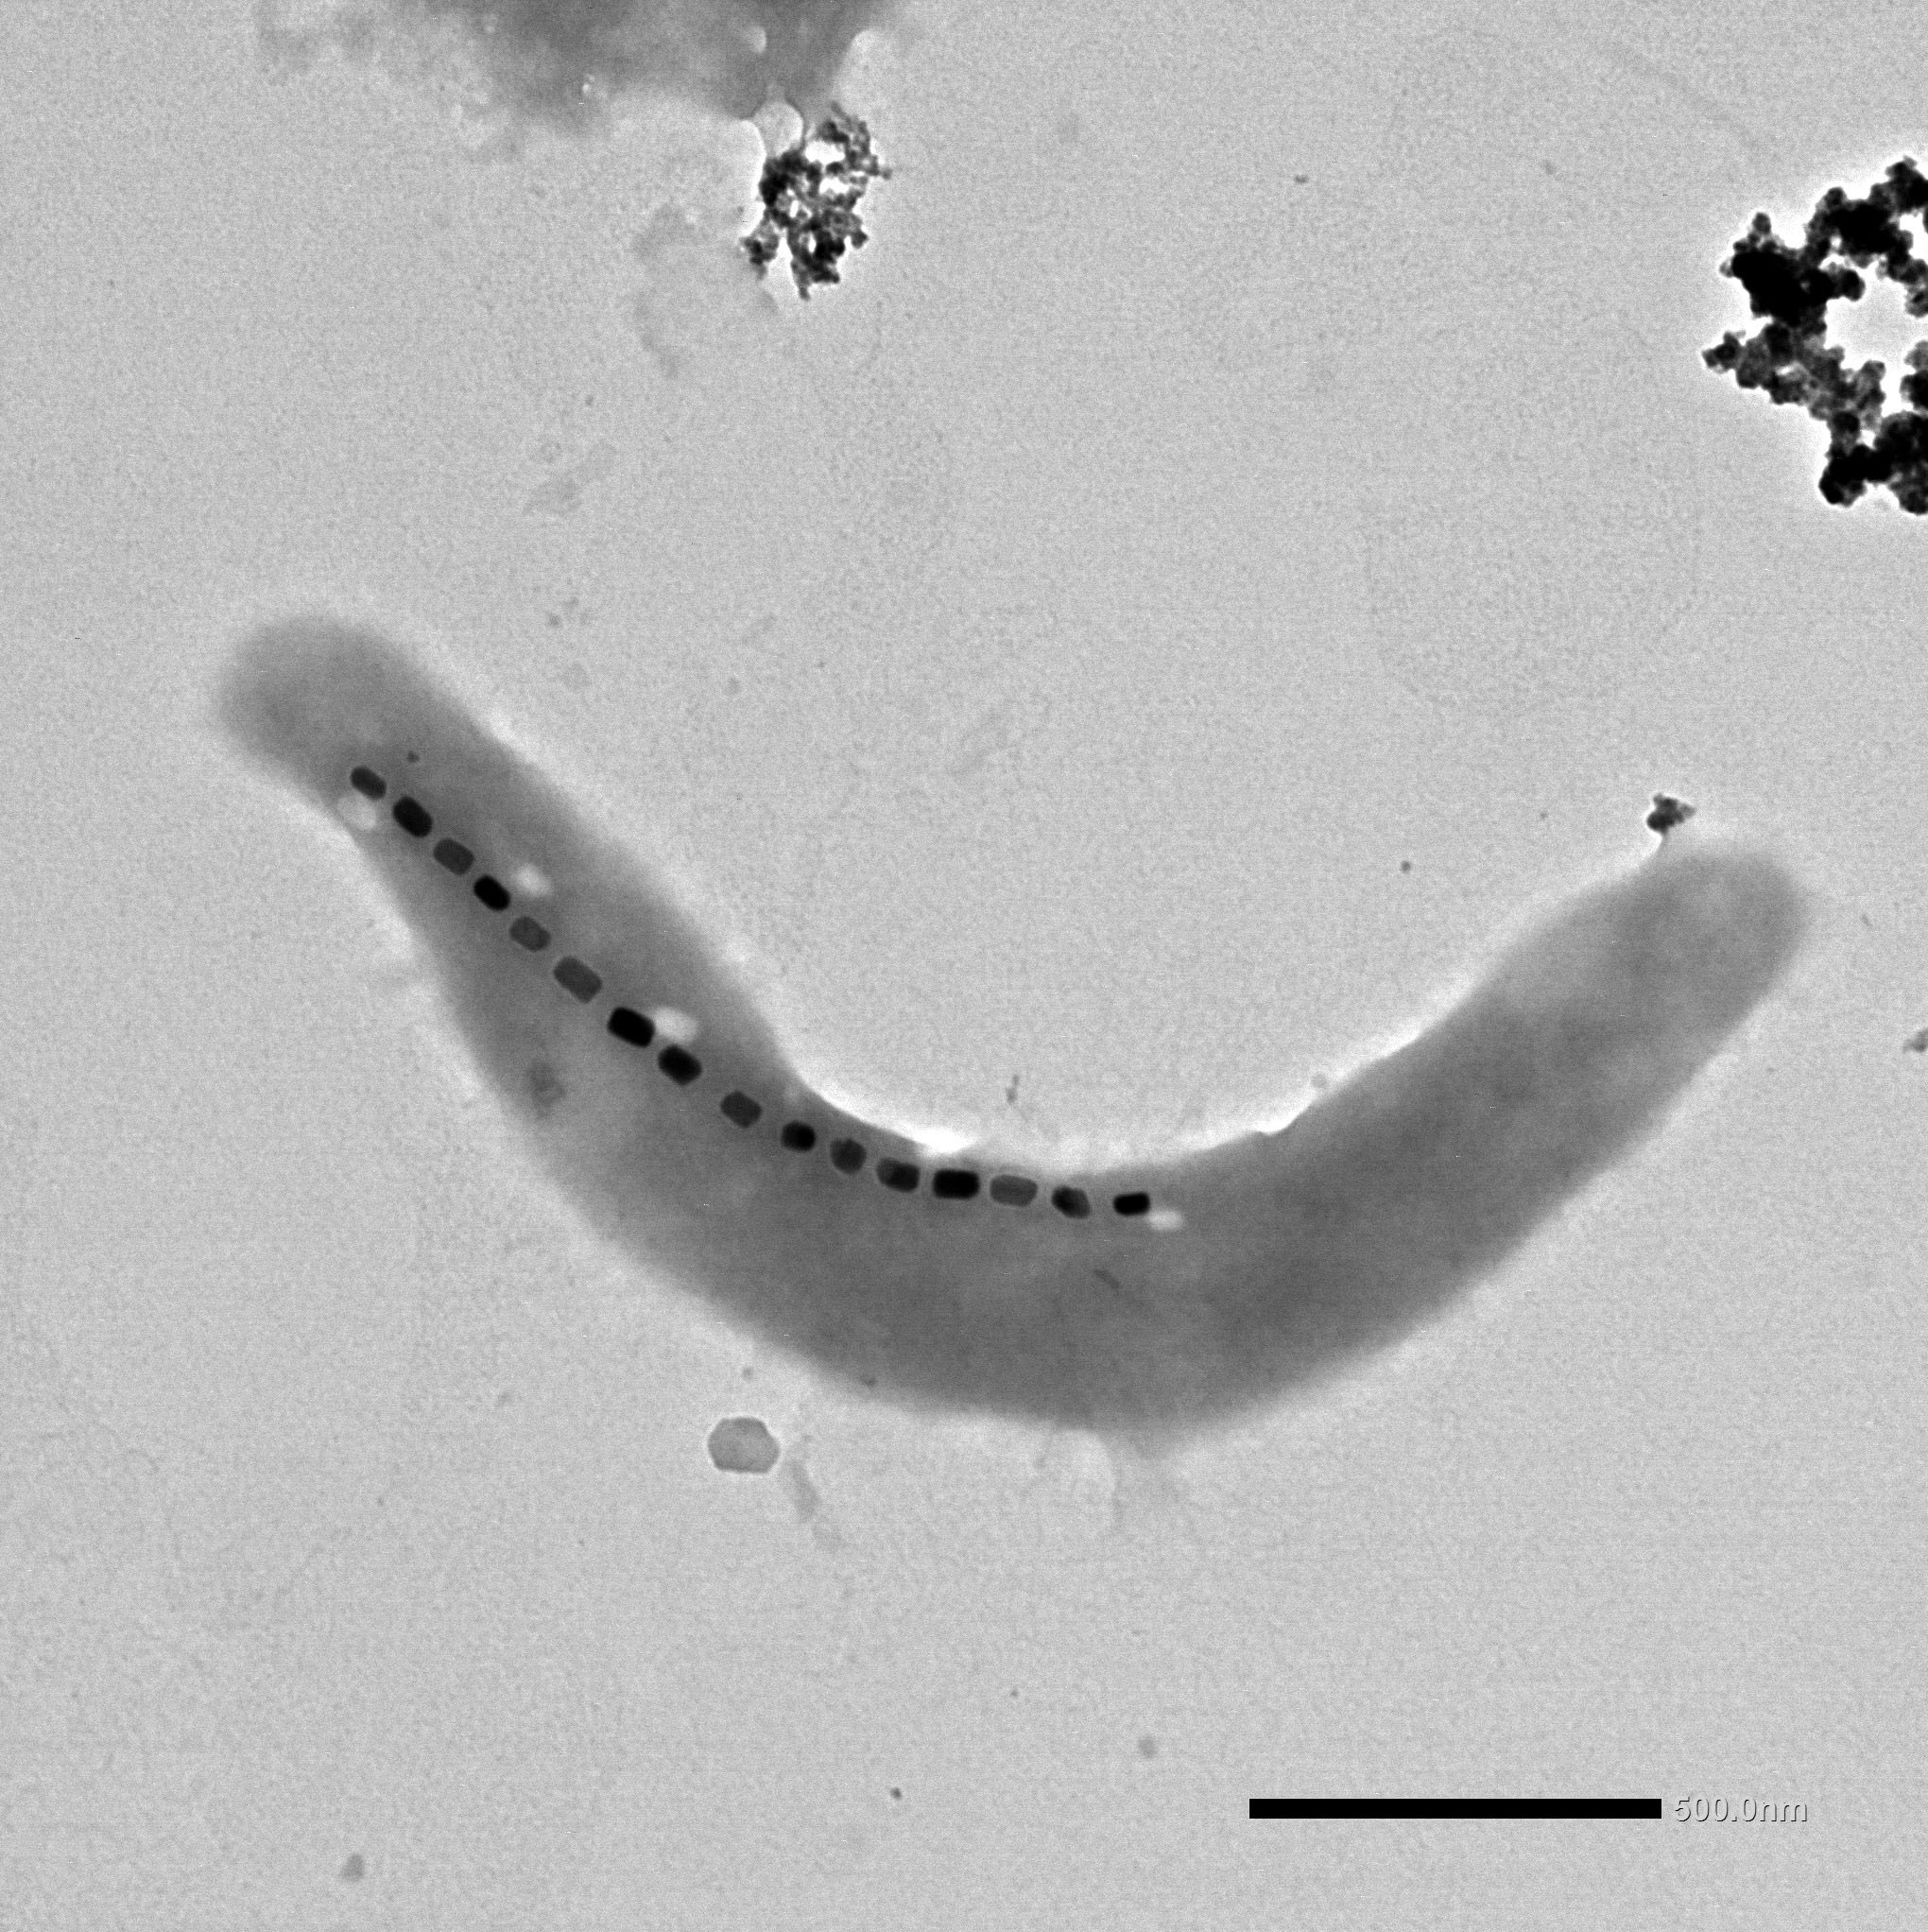 TEM image of a M. blakemorei MV-1 bacterium with several magnetic nanoparticles forming a chain-linke structure